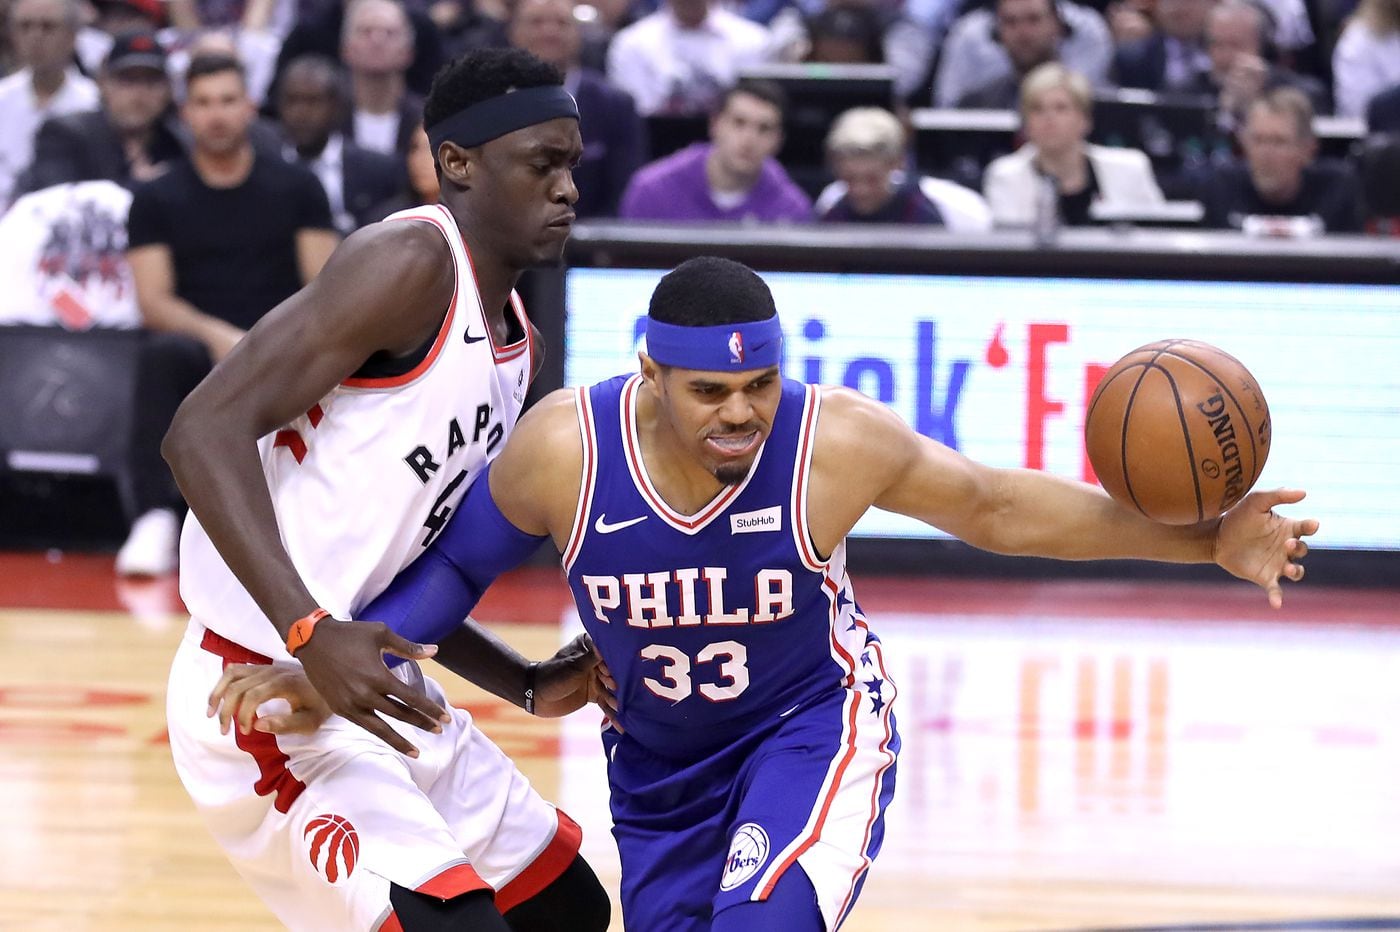 Nba Playoff History Says The Sixers Will Have A Hard Time Coming